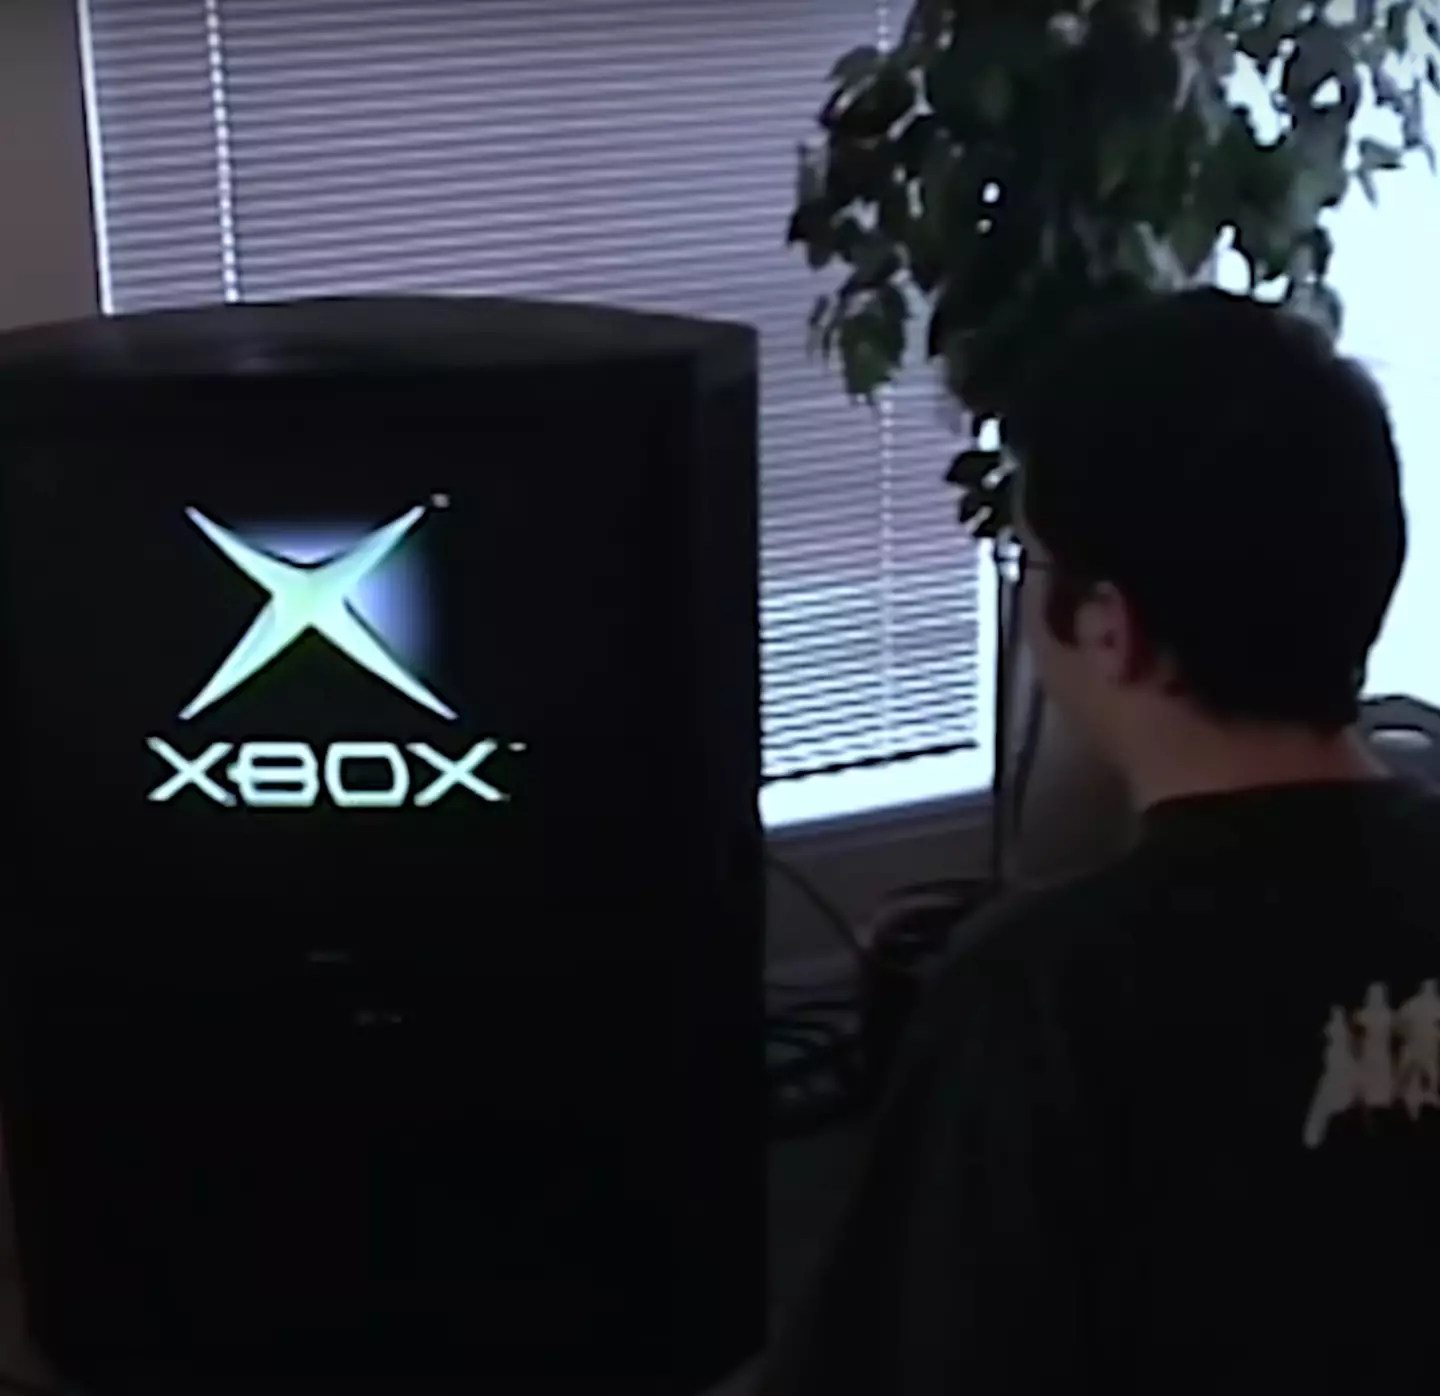 The dad recorded his son's reaction to unboxing the Xbox when it launched on 15 November 2001.